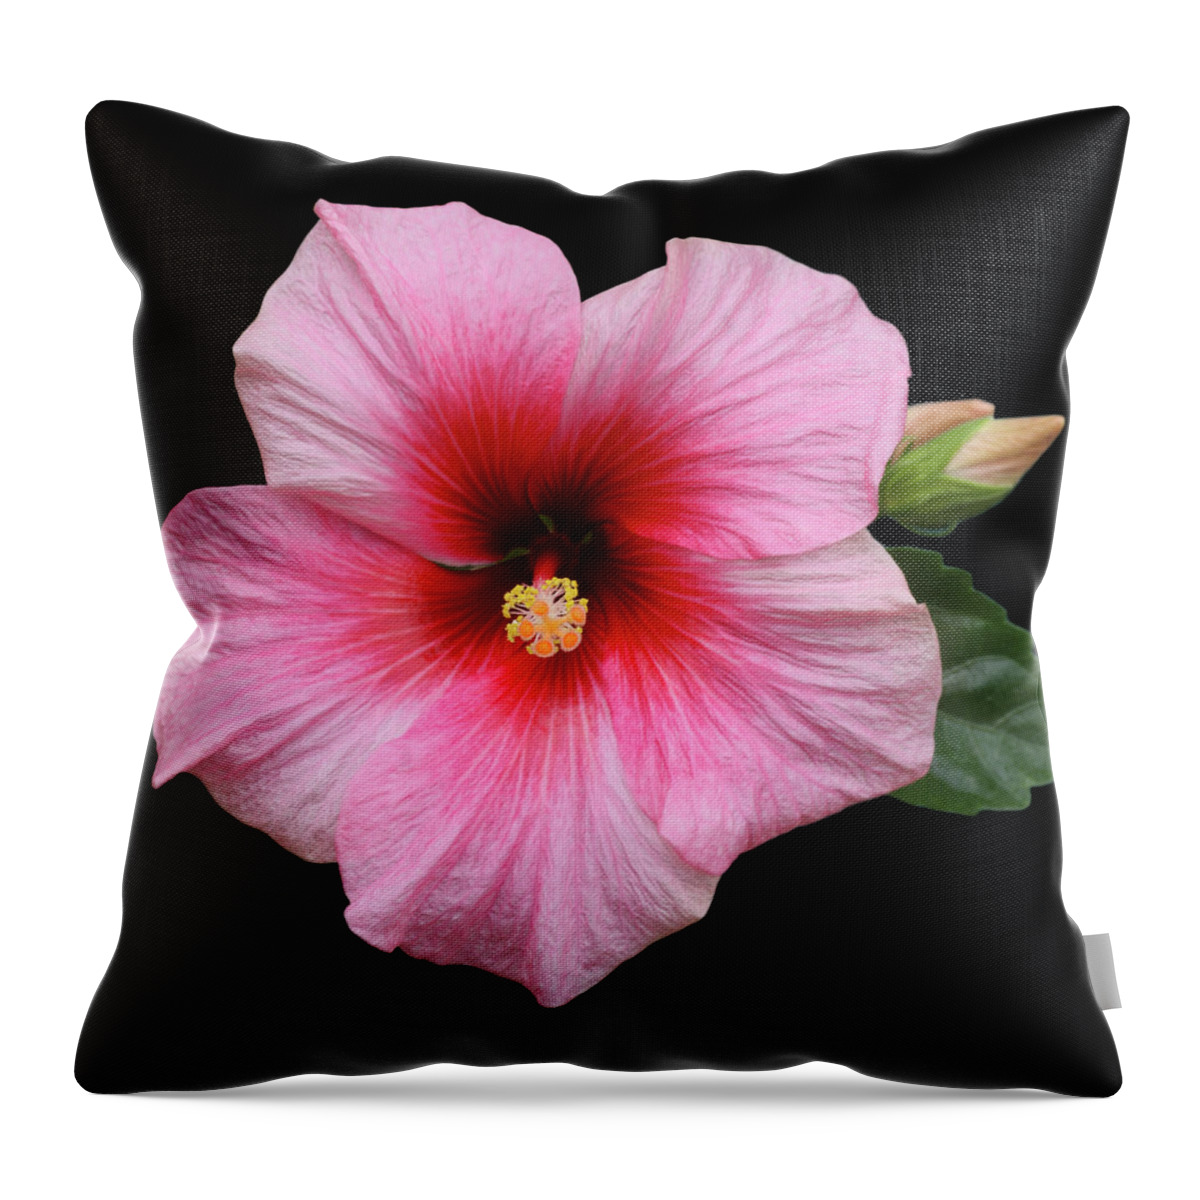 Haslemere Throw Pillow featuring the photograph Pink Hibiscus With Leaf And Bud by Rosemary Calvert